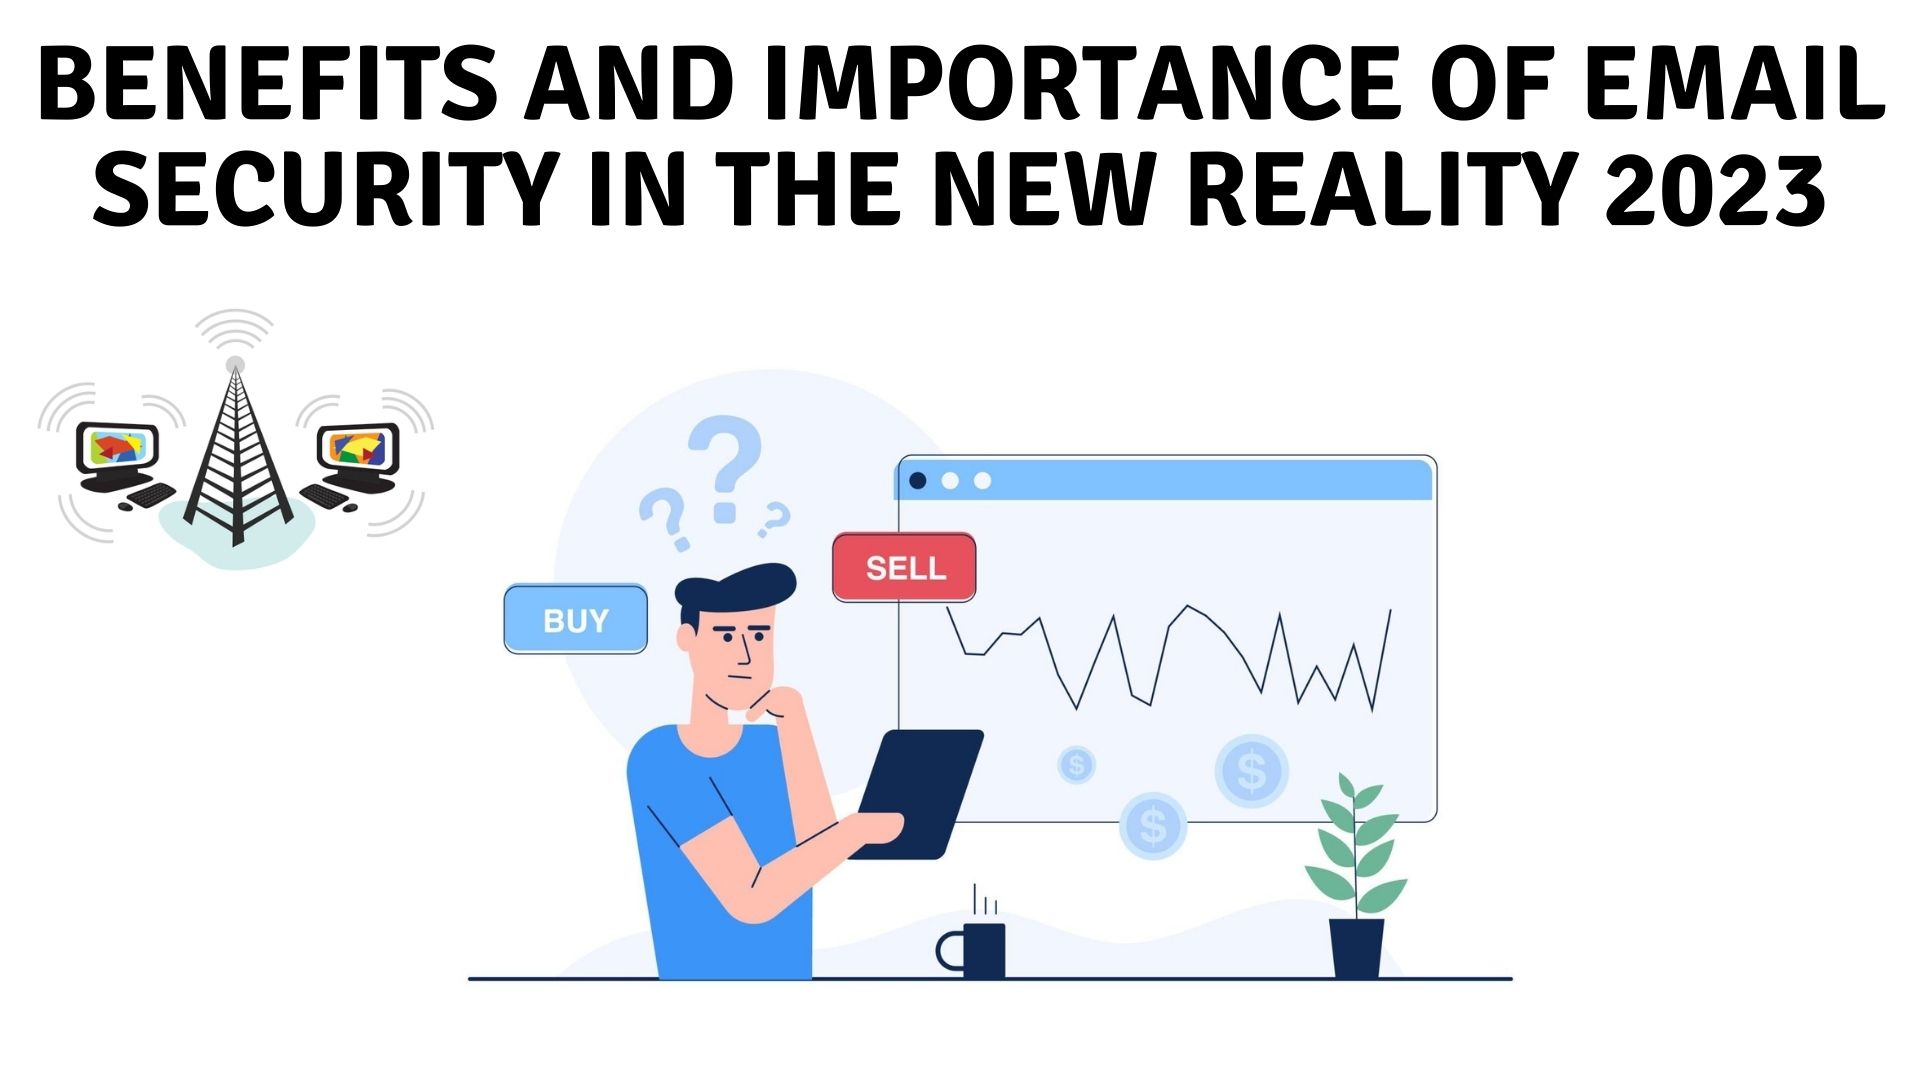 Benefits and importance of email security in the new reality 2023